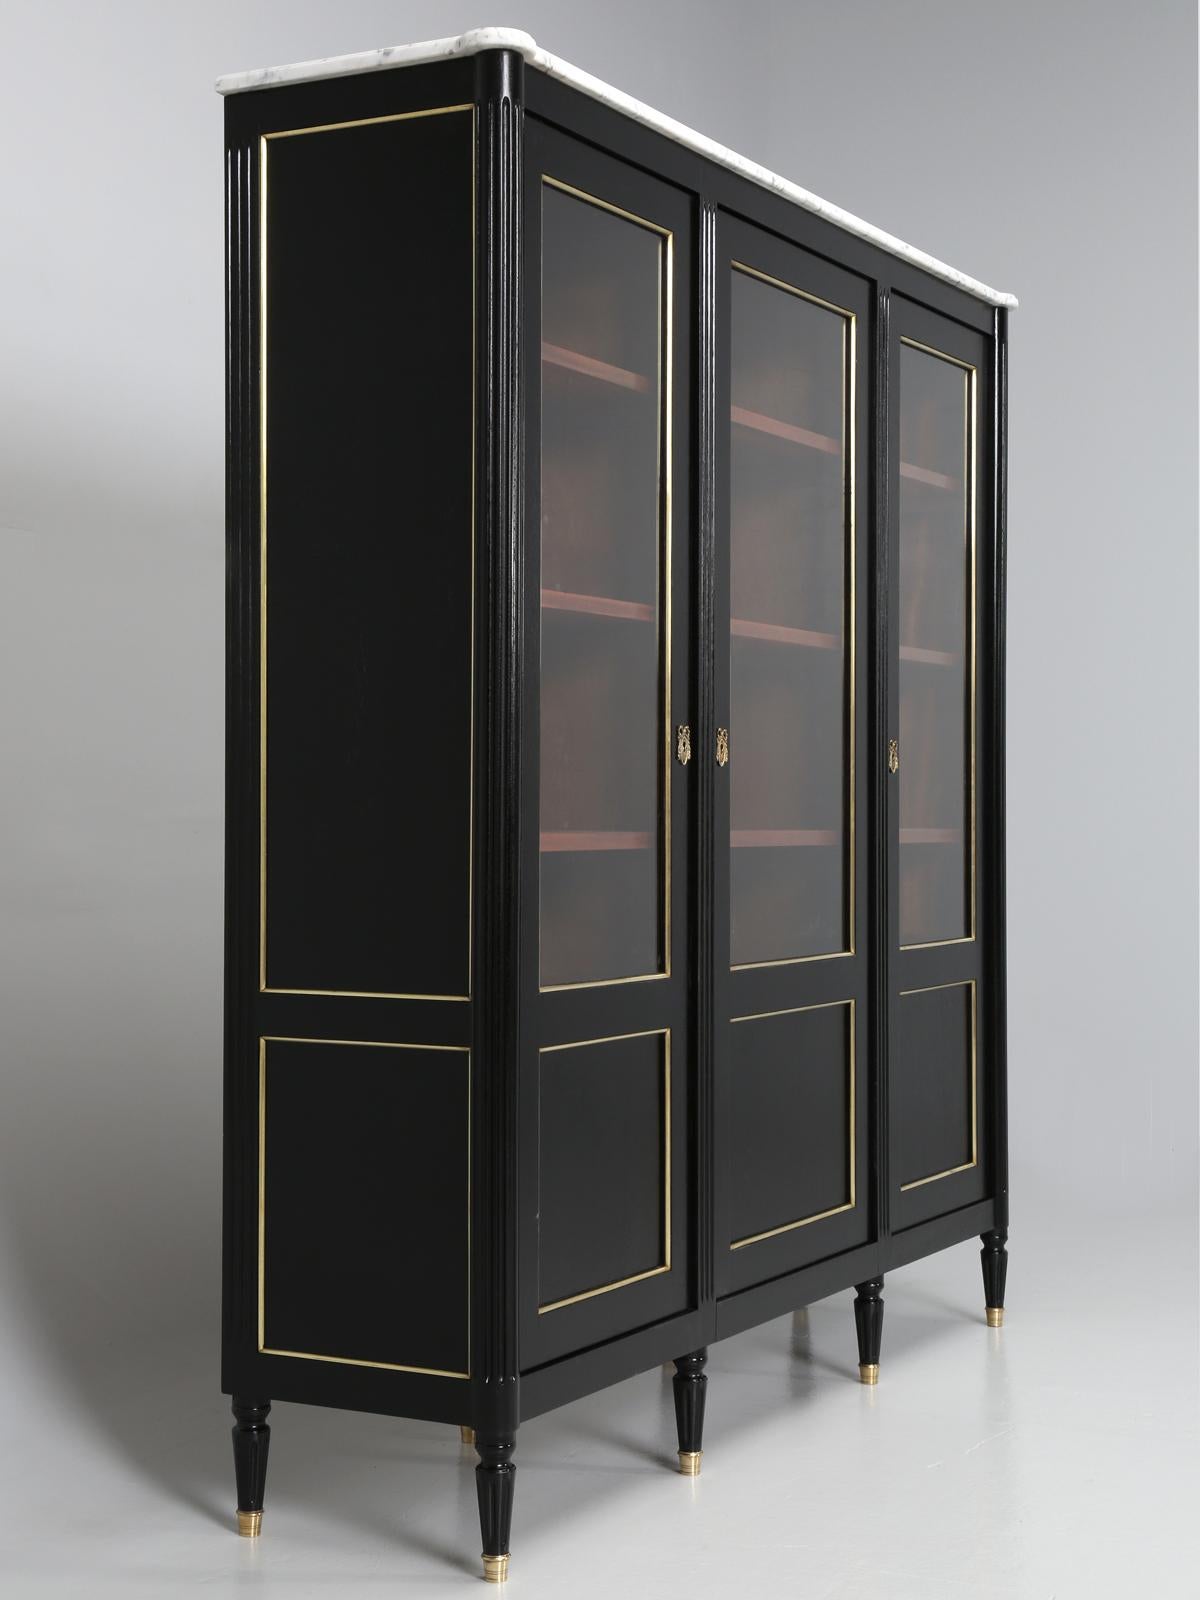 French Louis XVI style bookcase or bibliotheque in France. Our old plank finishing department, just completed hand-stripping of the mahogany bookcase and carefully applied an old fashion ebonized finish. The entire antique French Louis XVI style